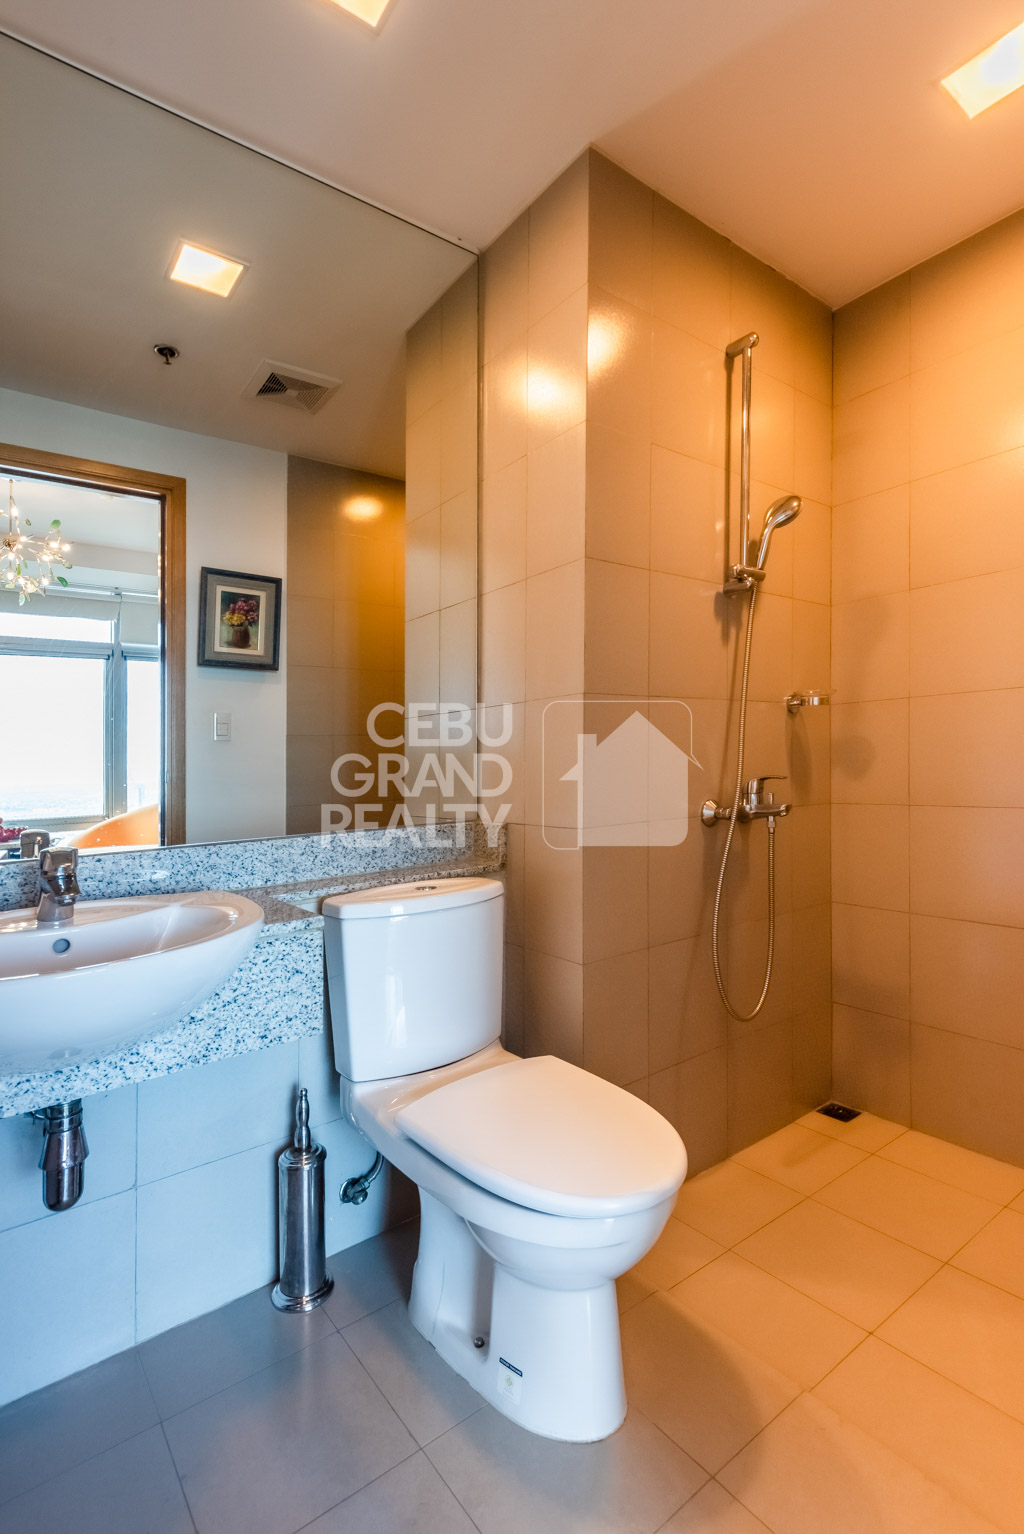 RCPP56 3 Bedroom Penthouse Condo for Rent in Park Point Residences - 24